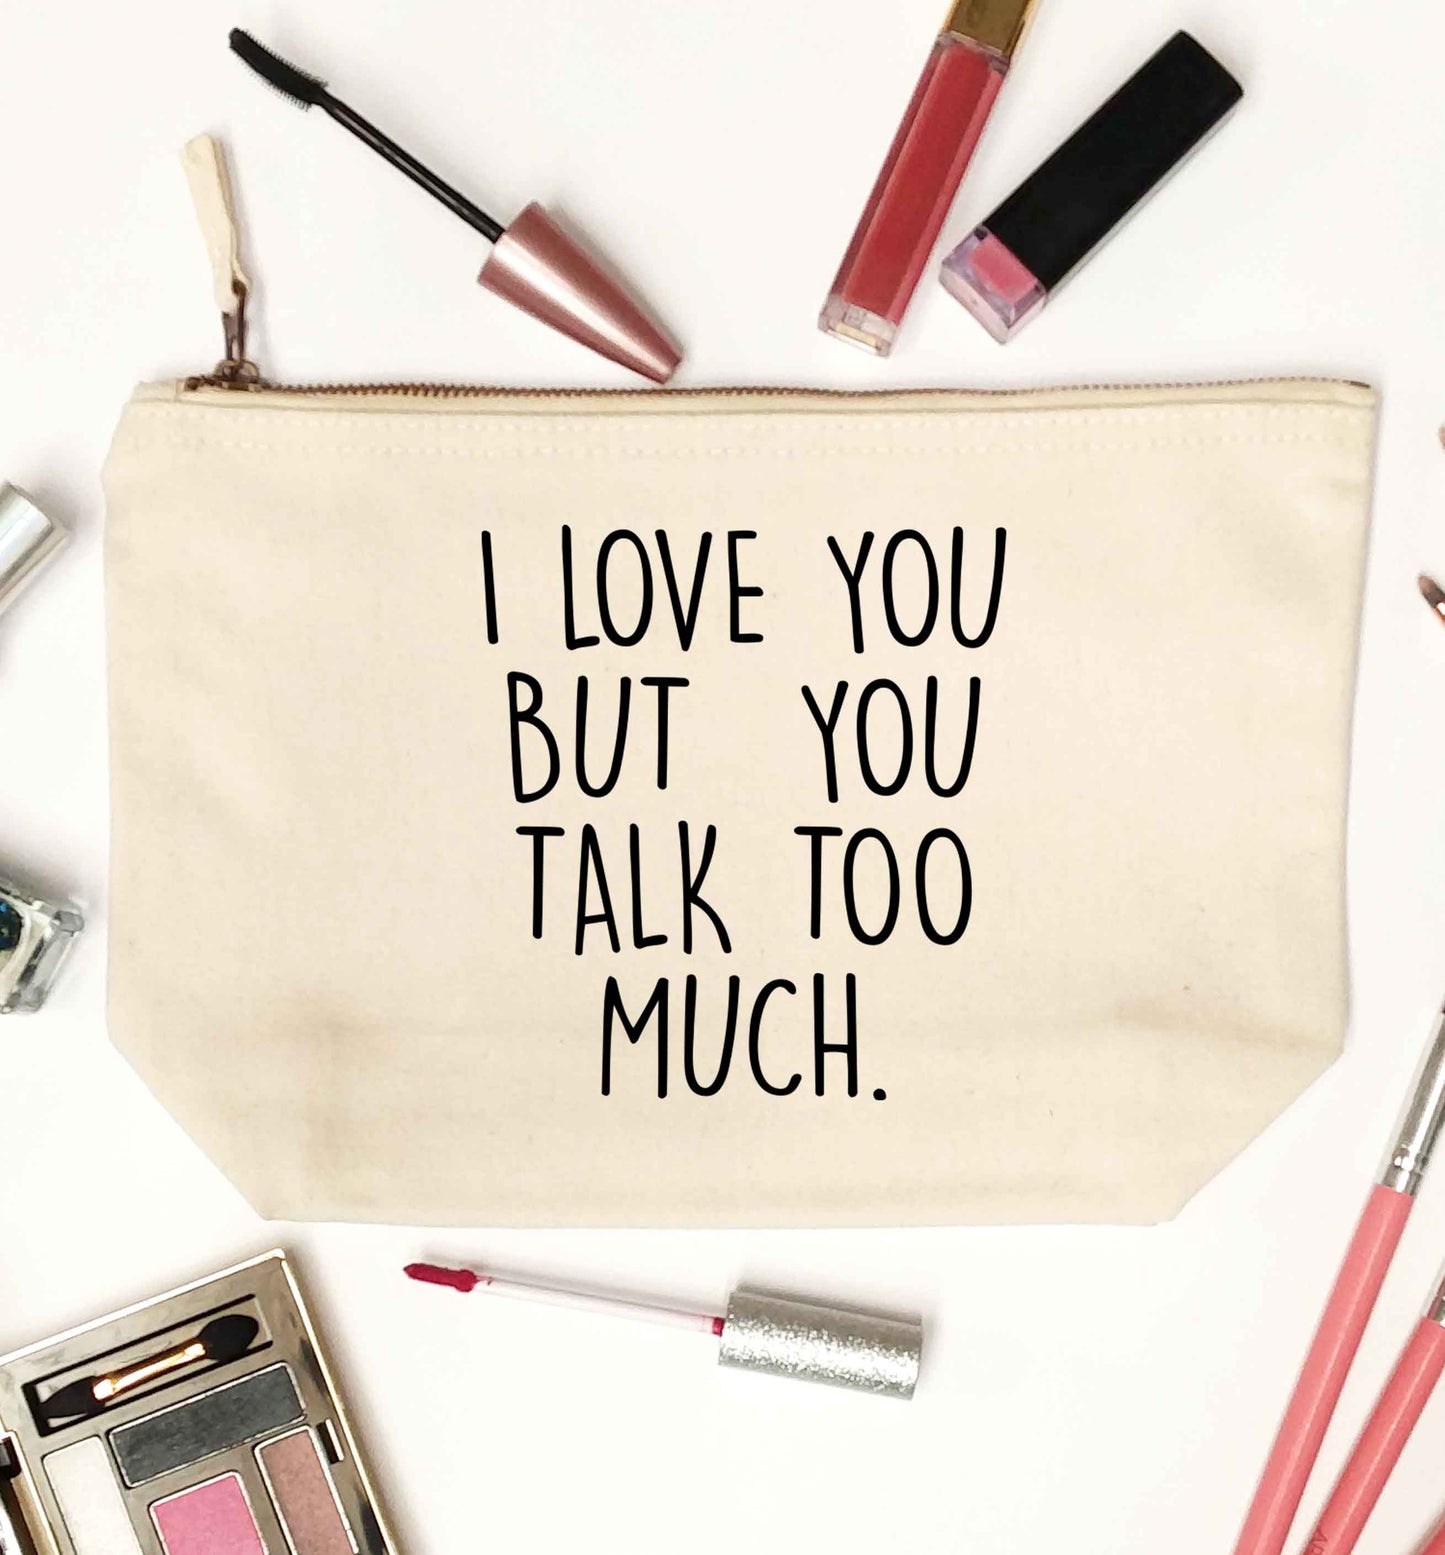 I love you but you talk too much natural makeup bag